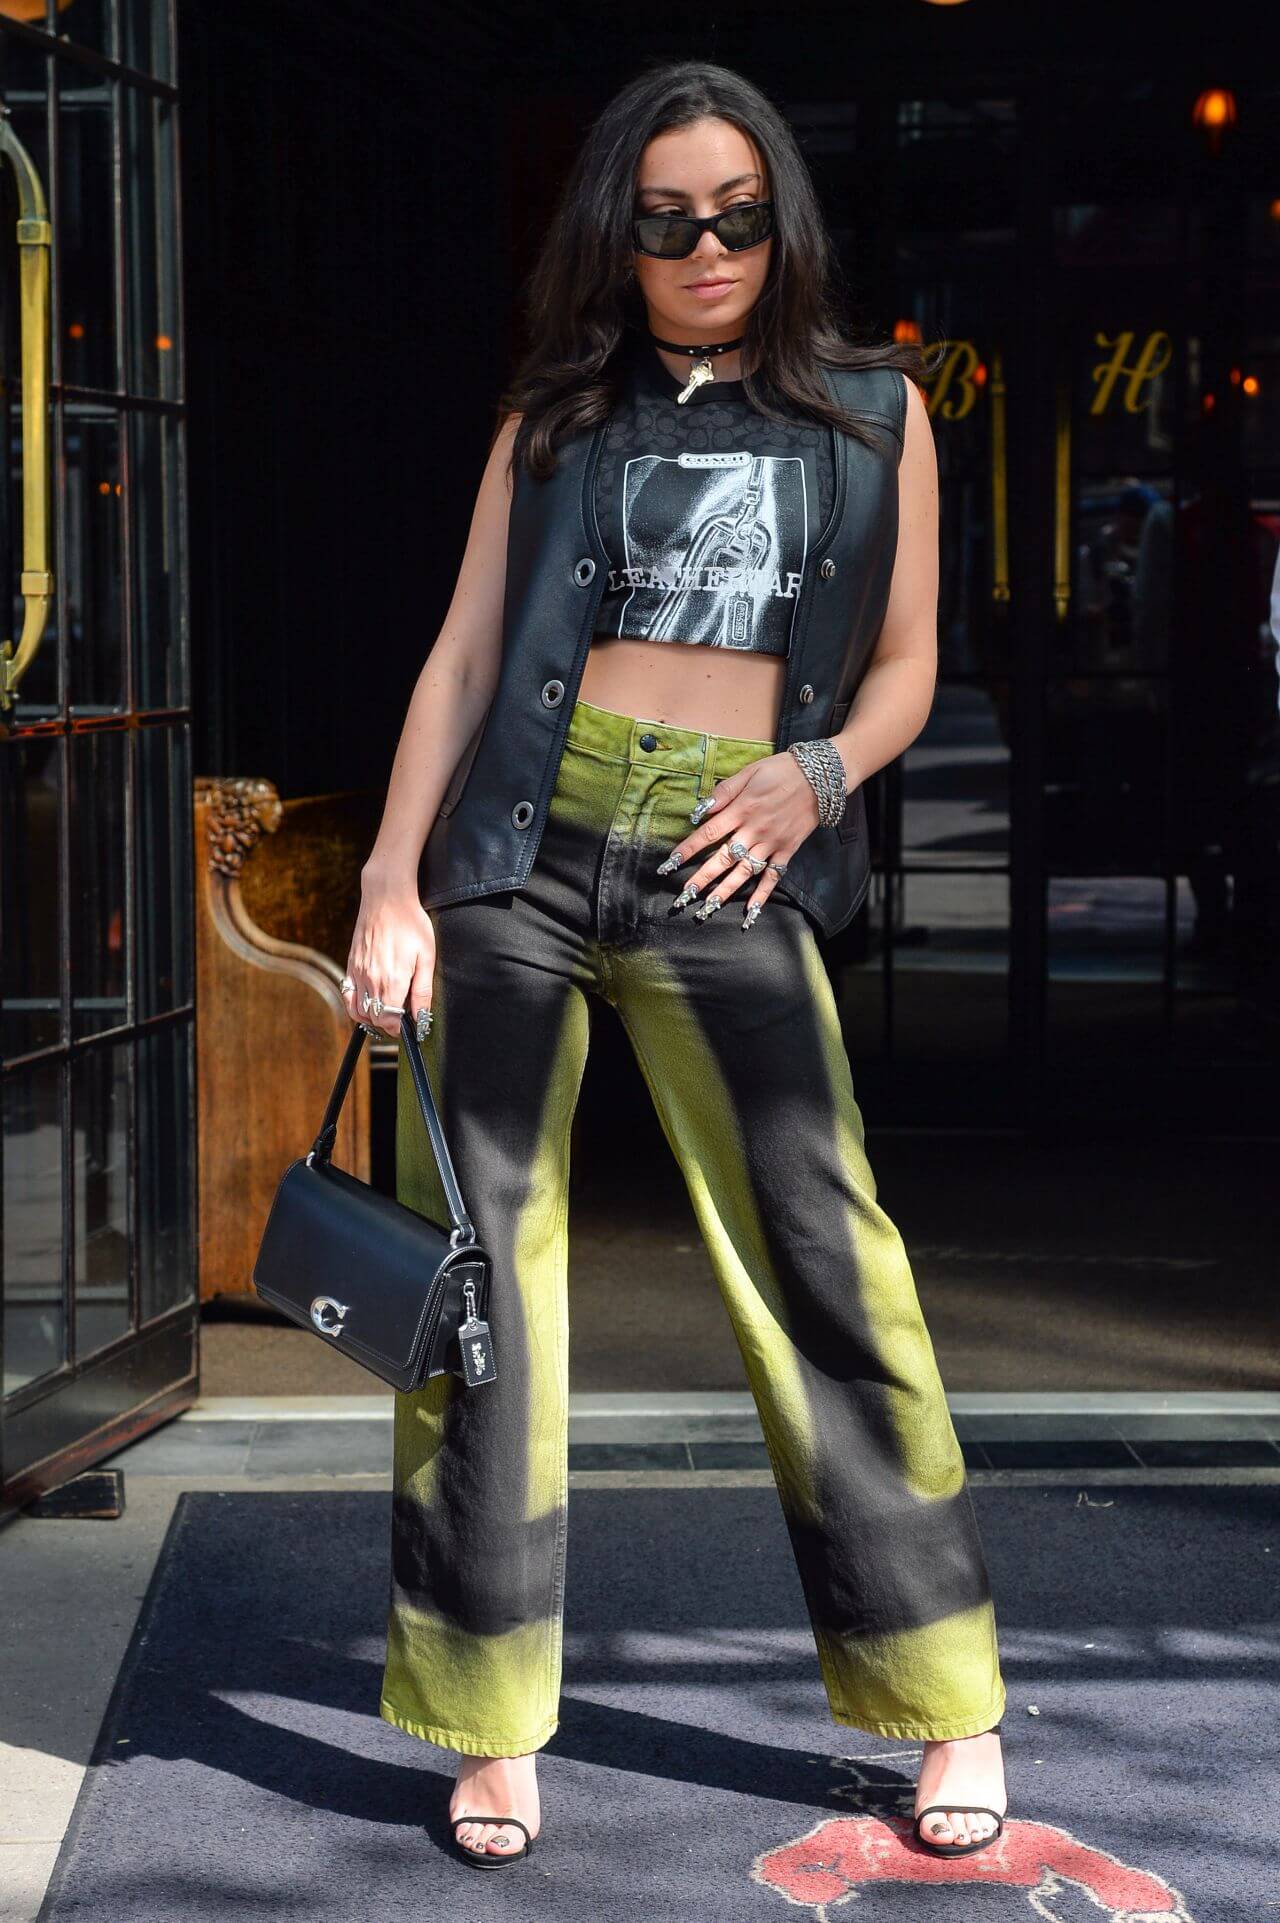 Charli XCX Perfect Looks In Black Crop Top & Jacket With Dual Shades High Waist Denim Bottoms